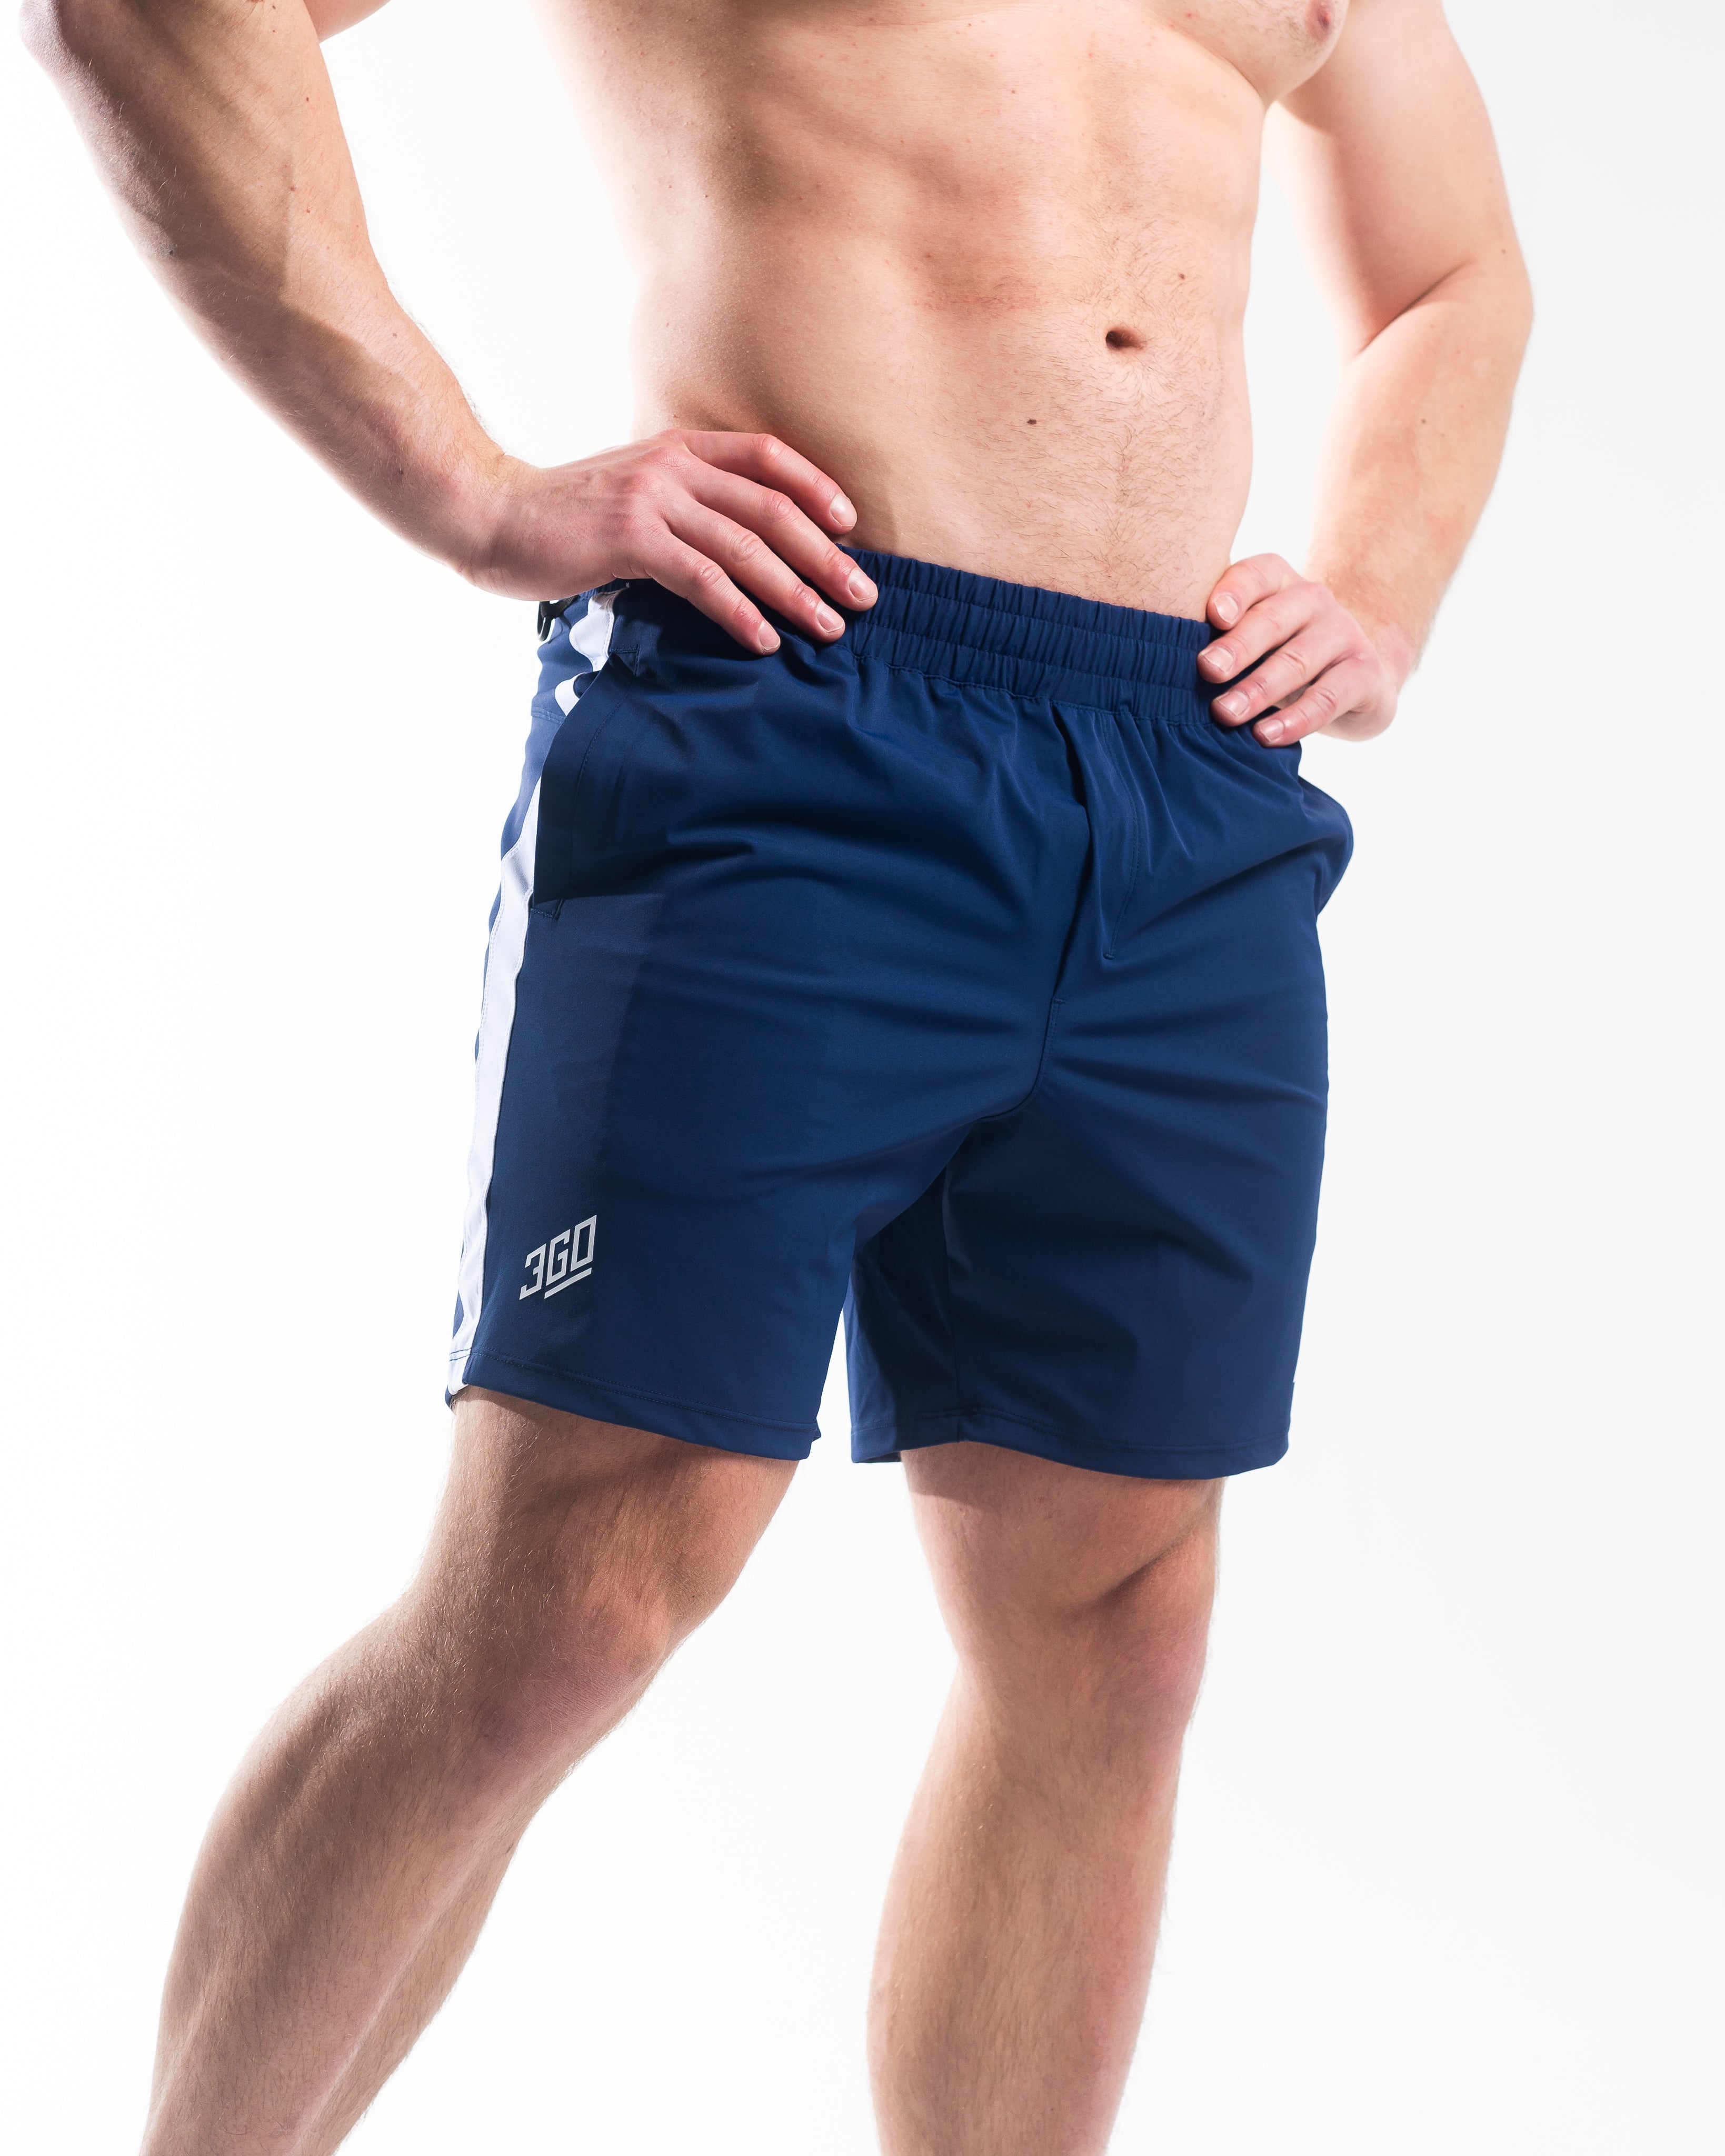 360GO was created to provide the flexibility for all movements in your training while offering comfort. These shorts offer 360 degrees of stretch in all angles and allow you to remain comfortable without limiting any movement in both training and life environments. Designed with a wide drawstring to easily adjust your waist without slipping. Purchase 360GO KWD shorts from A7 Europe. Genouillères powerlifting shipping to France, Spain, Ireland, Germany, Italy, Sweden and EU.